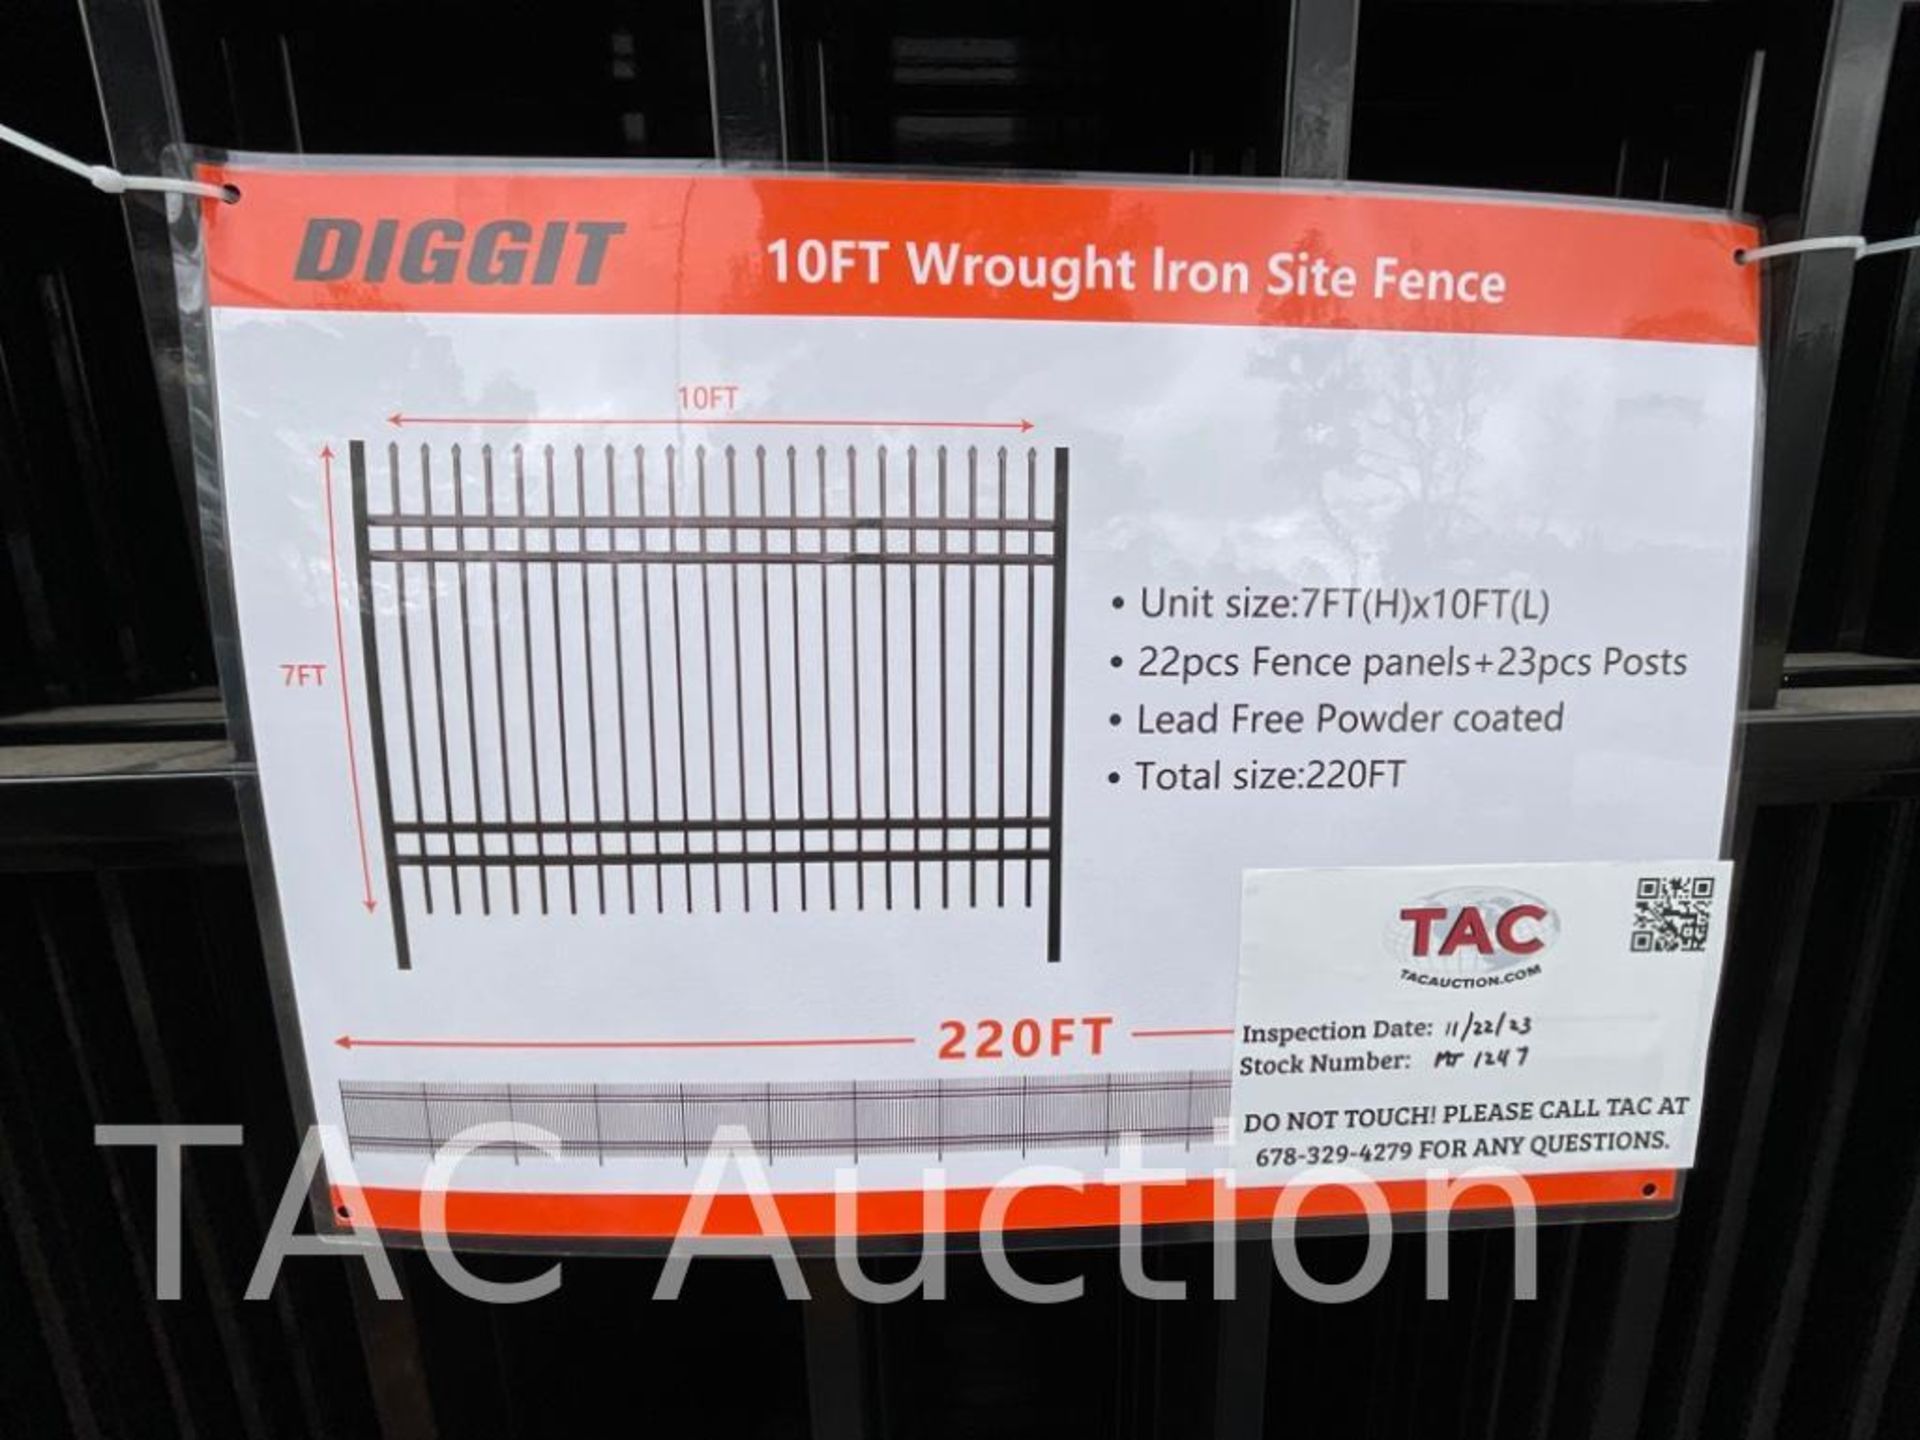 New Powder Coated Wrought Iron Fencing - Image 3 of 5